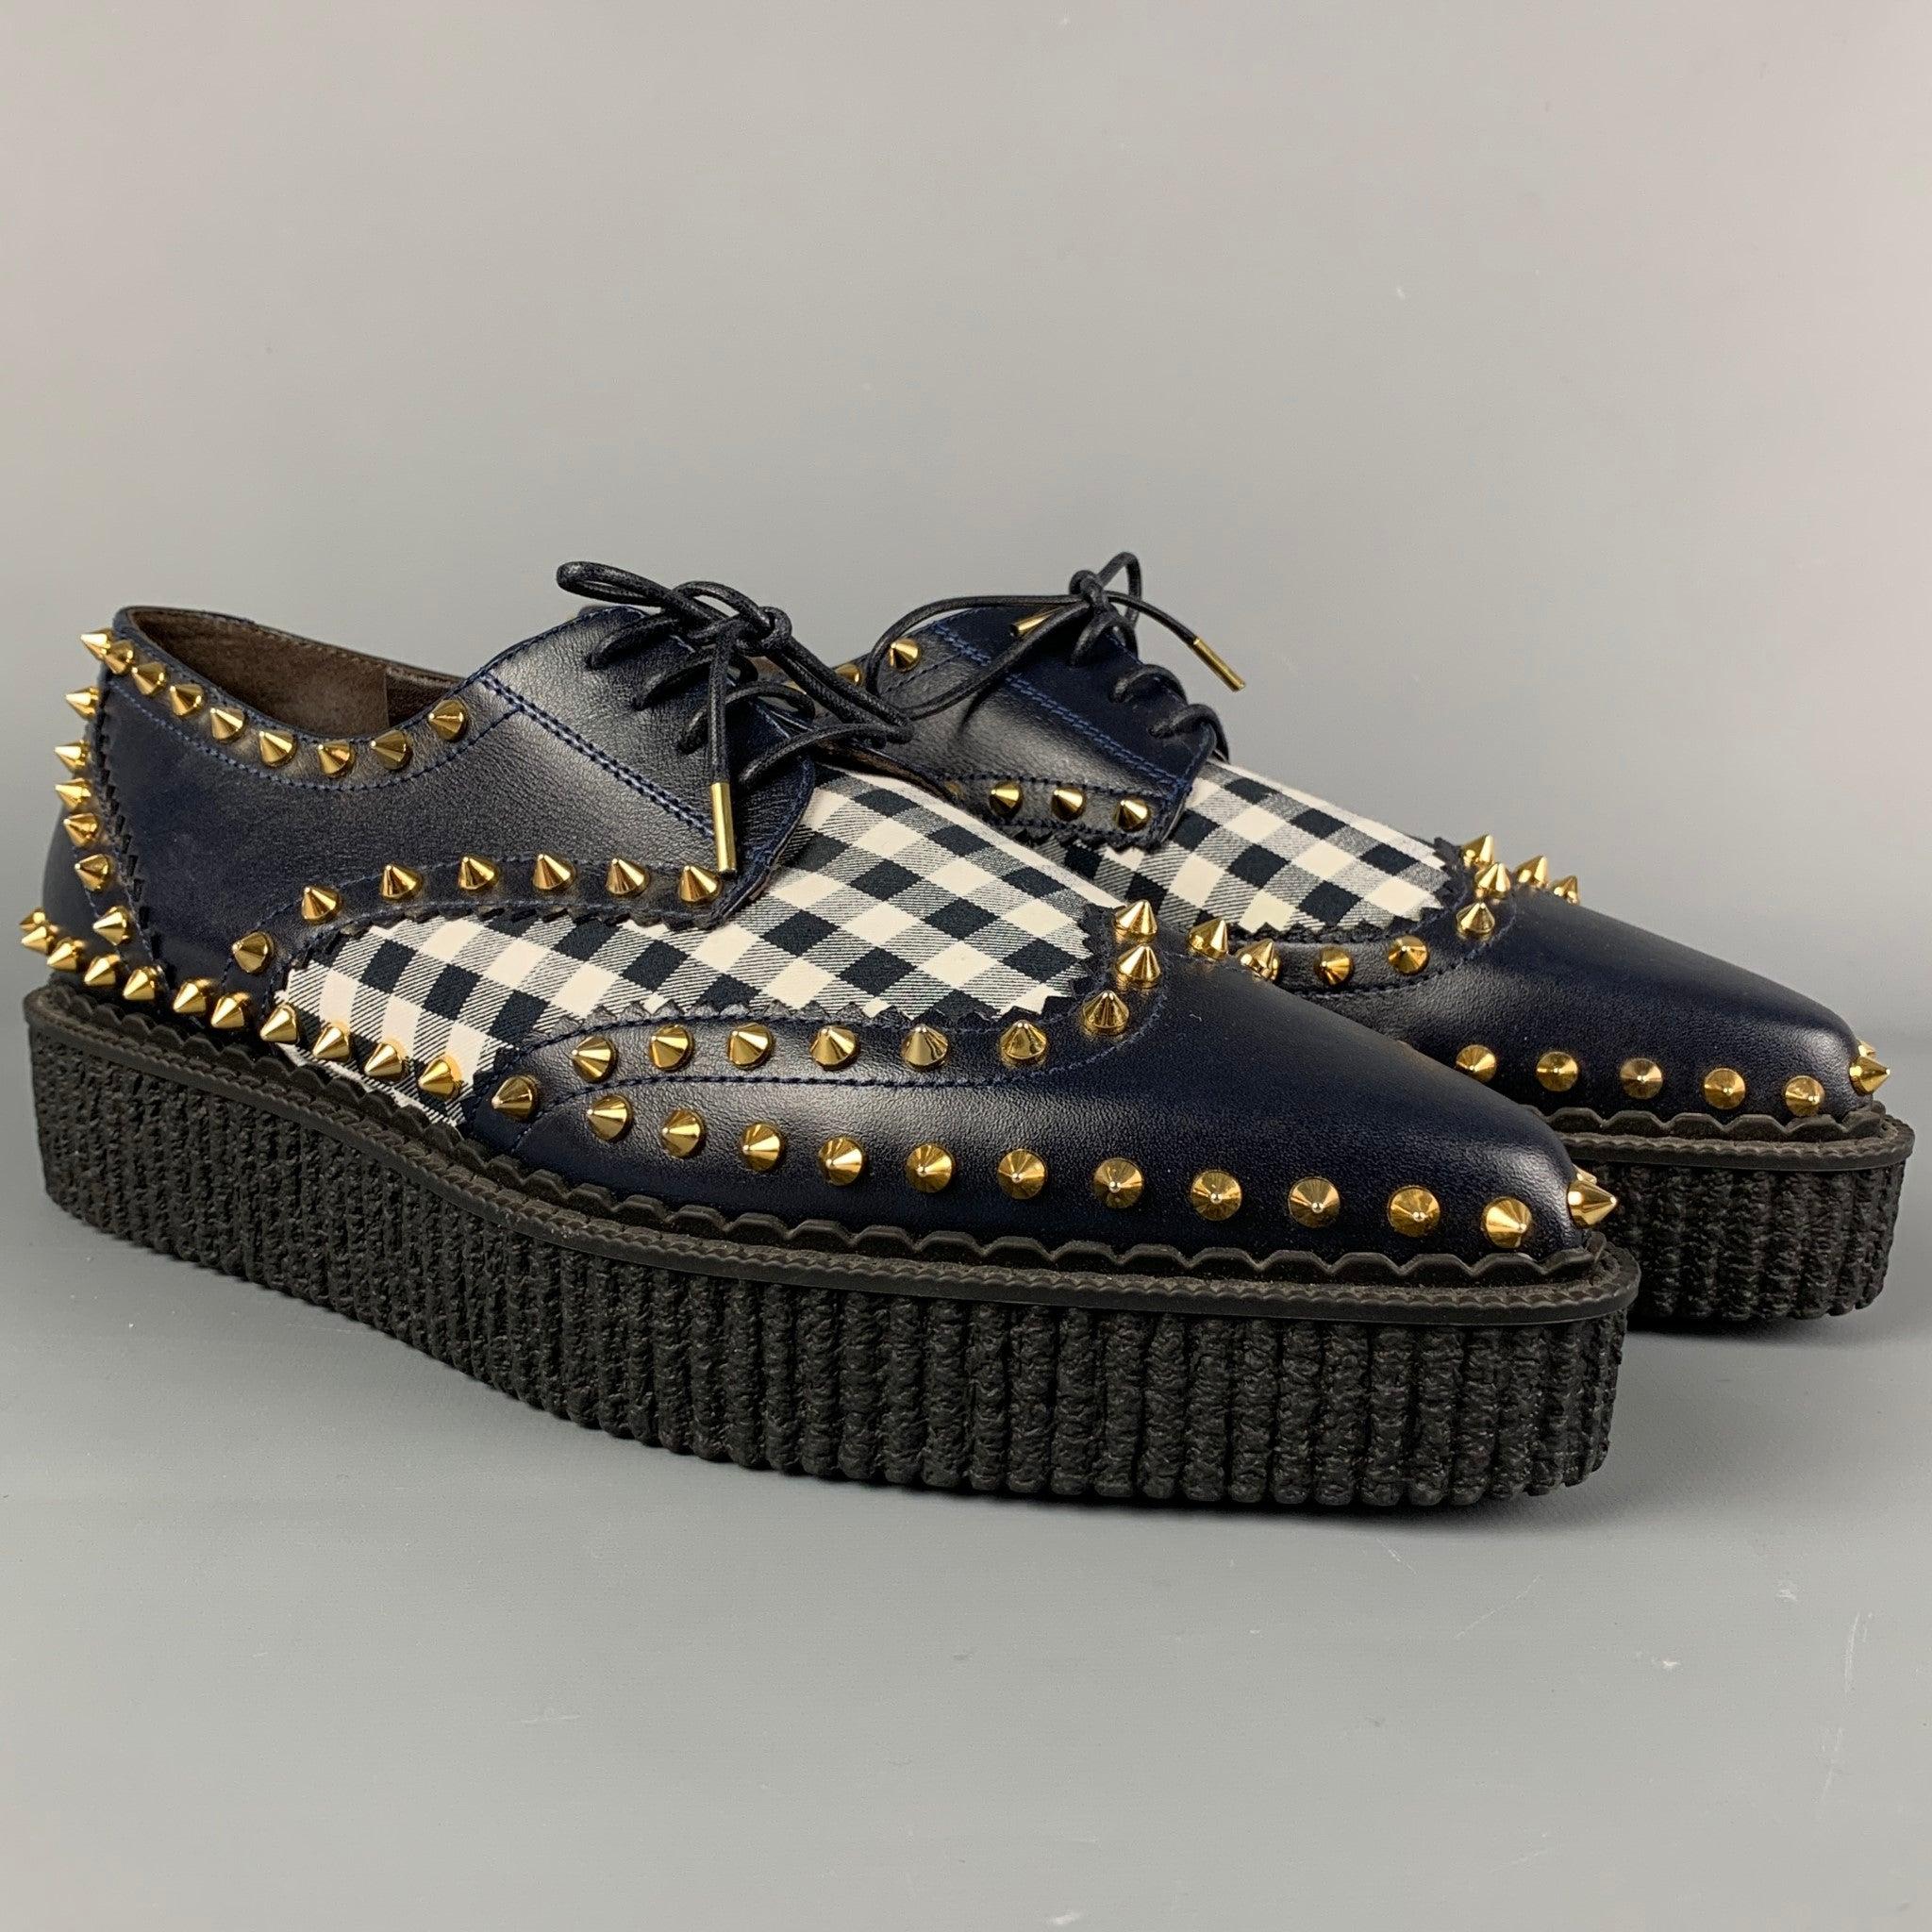 MICHAEL KORS shoes comes in a navy & white leather featuring a pointed toe, gold tone studs, platform sole, and a lace up closure. Made in Italy.
Excellent
Pre-Owned Condition. 

Marked:   41Length: 11.5 inches  Width: 3.75 inches  Platform: 1.25